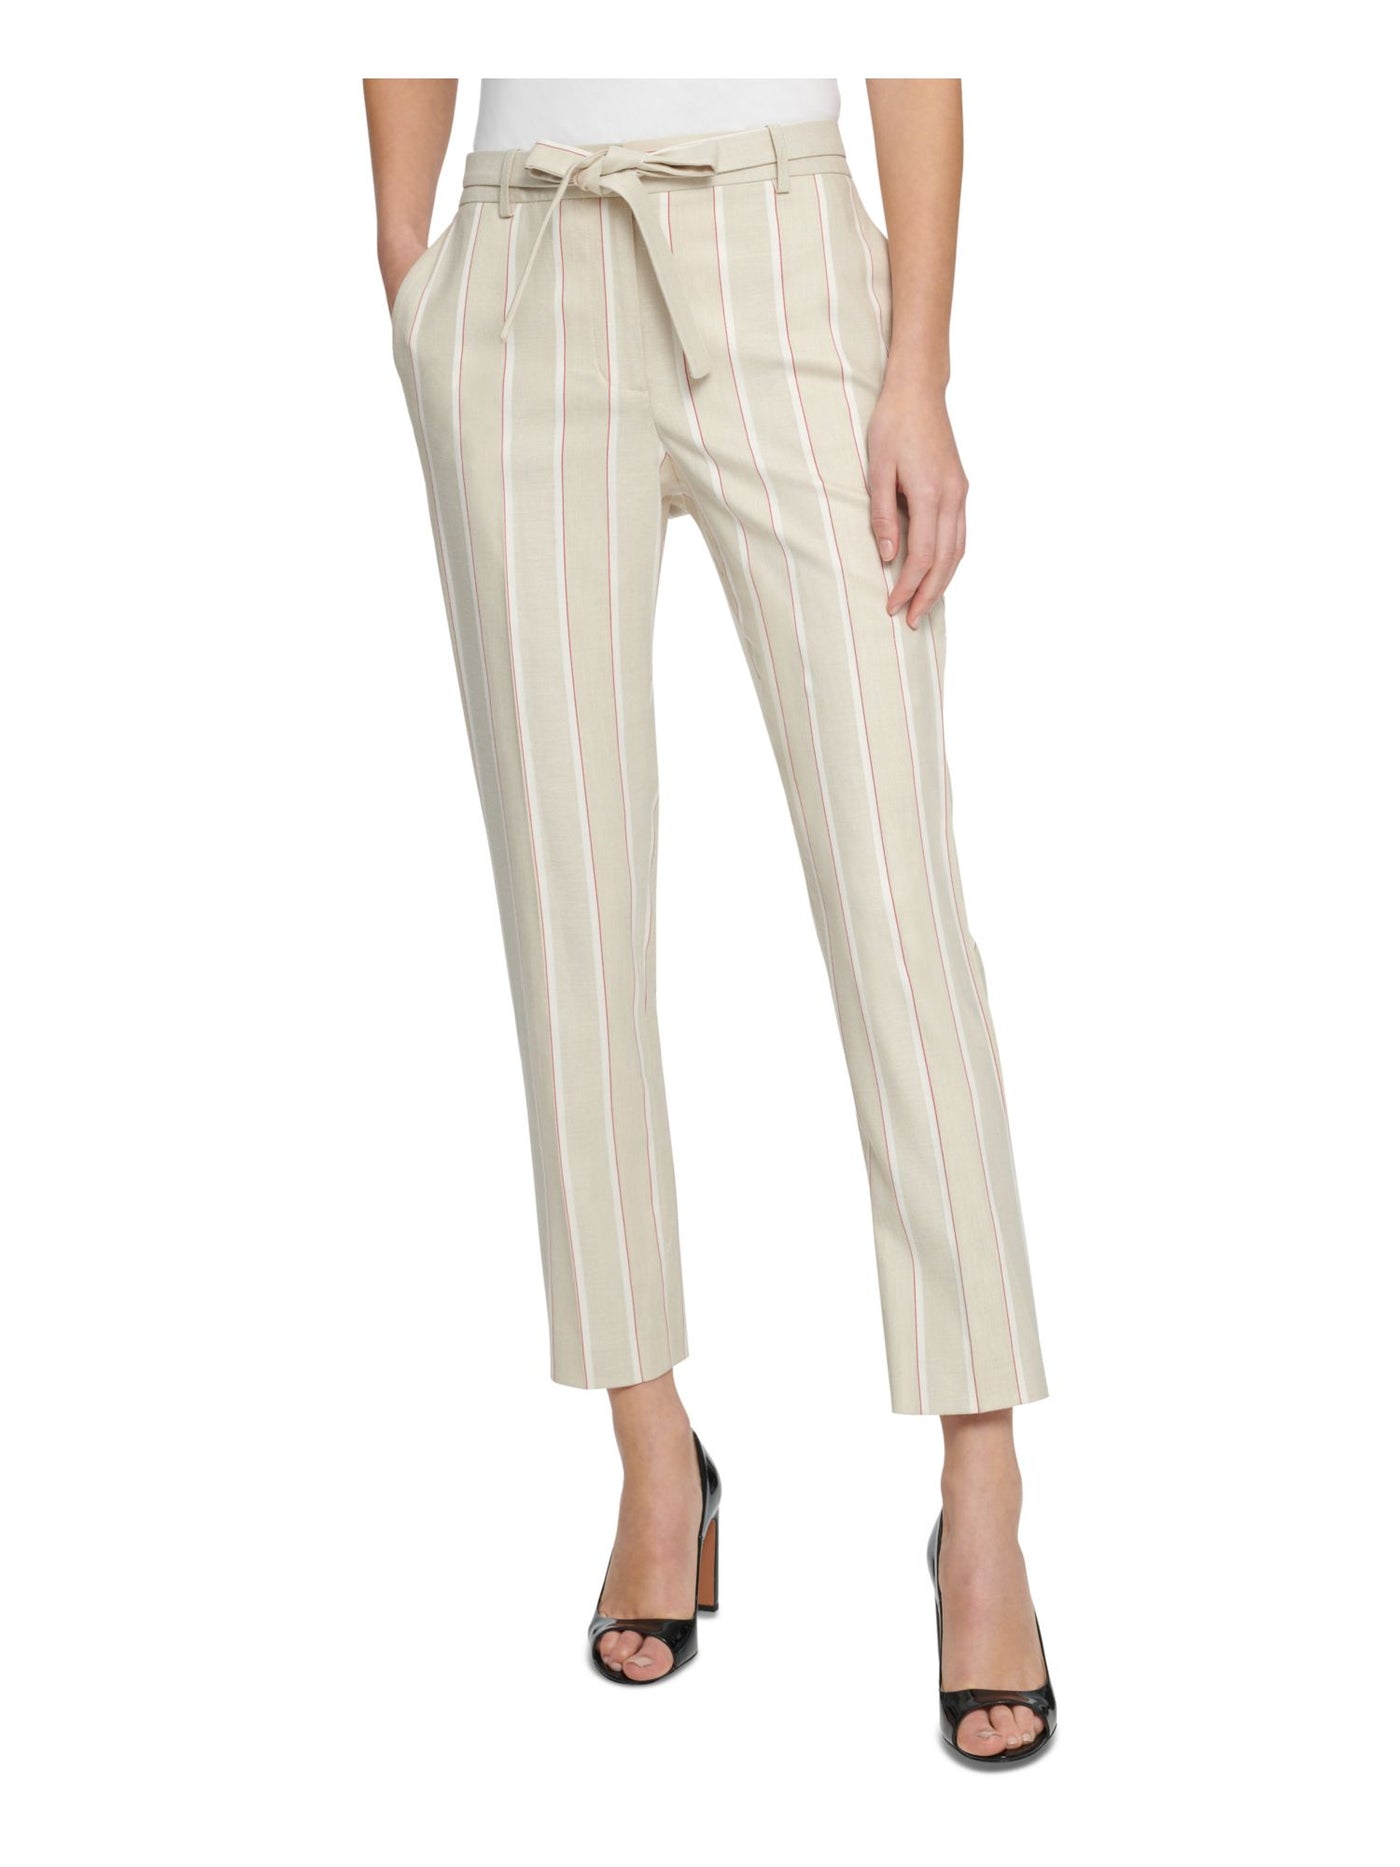 DKNY Womens Beige Stretch Pocketed Zippered Tie-waist Ankle Mid-rise Pinstripe Wear To Work Straight leg Pants 14